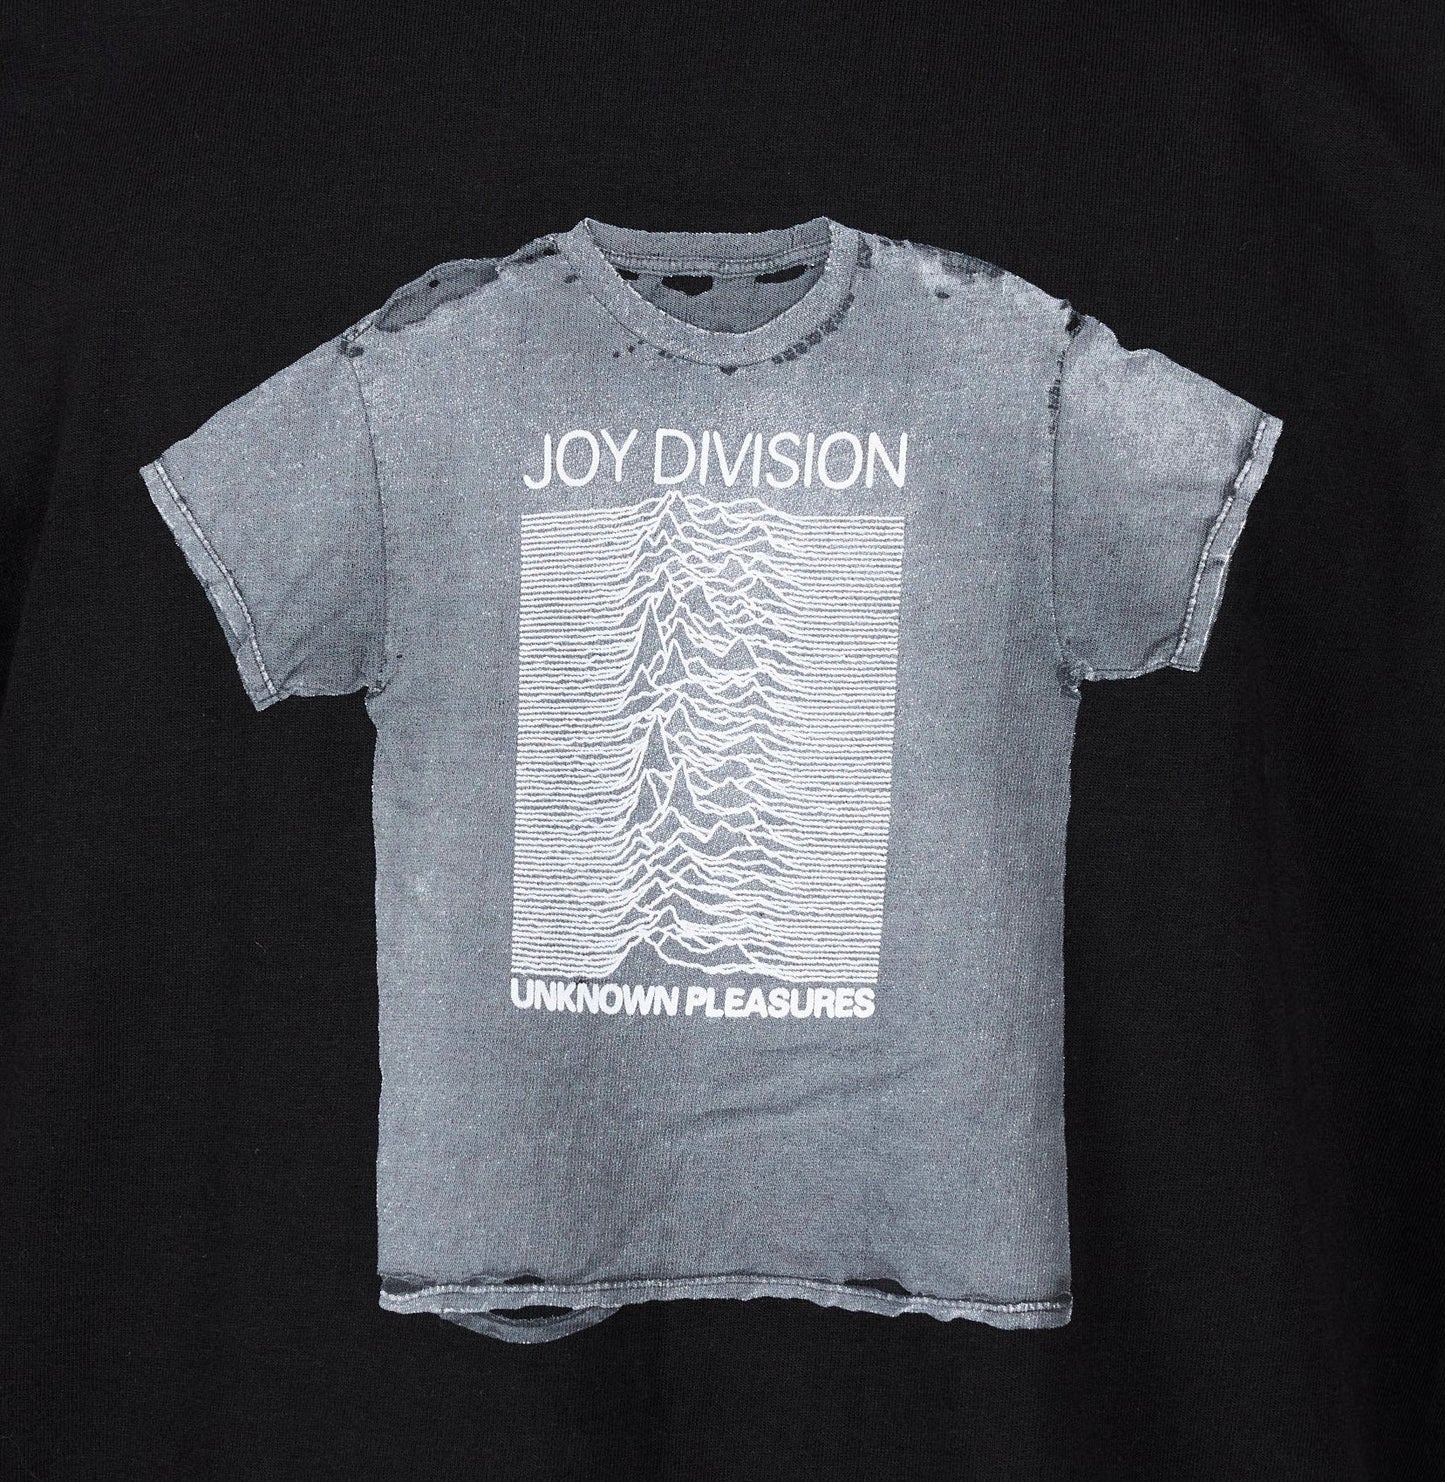 Gray official PLEASURES "Unknown Pleasures" album cotton screen-printed t-shirt on a black background.